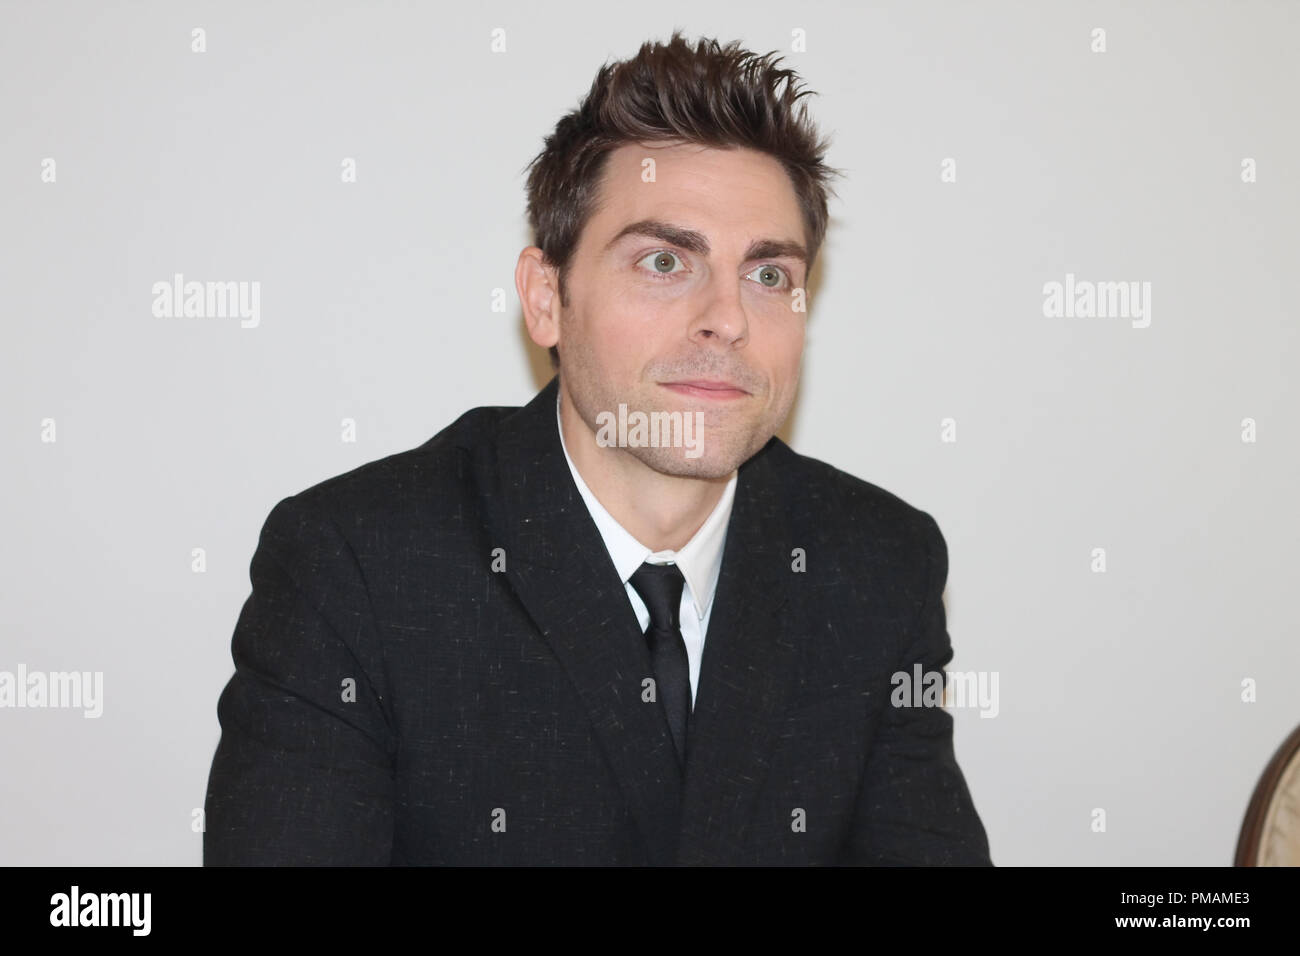 Colt Prattes at 'Dirty Dancing' TV Movie Press Conference held on May 18, 2017 at the Four Seasons Hotel in Beverly Hills,  California. No Tabloids. No USA sales for 30 days of origination. File Reference # 33320 007JRC  For Editorial Use Only -  All Rights Reserved Stock Photo